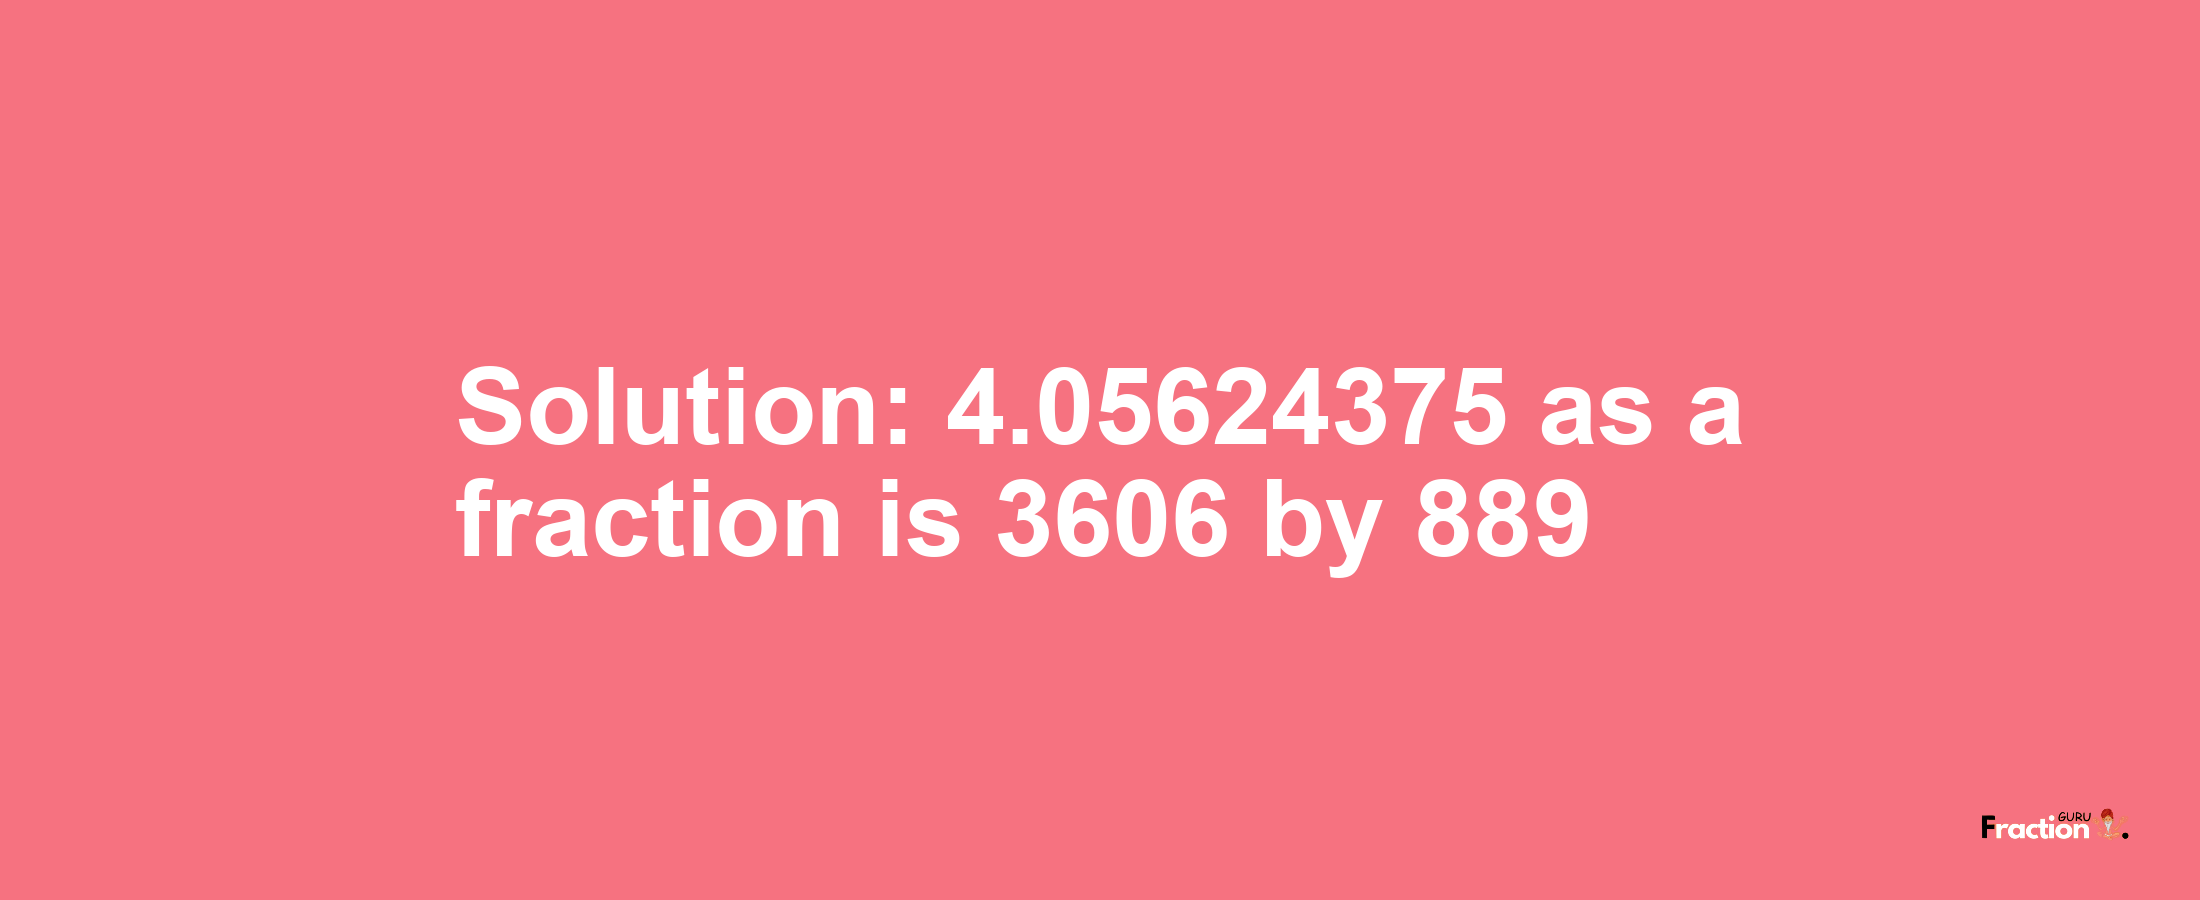 Solution:4.05624375 as a fraction is 3606/889